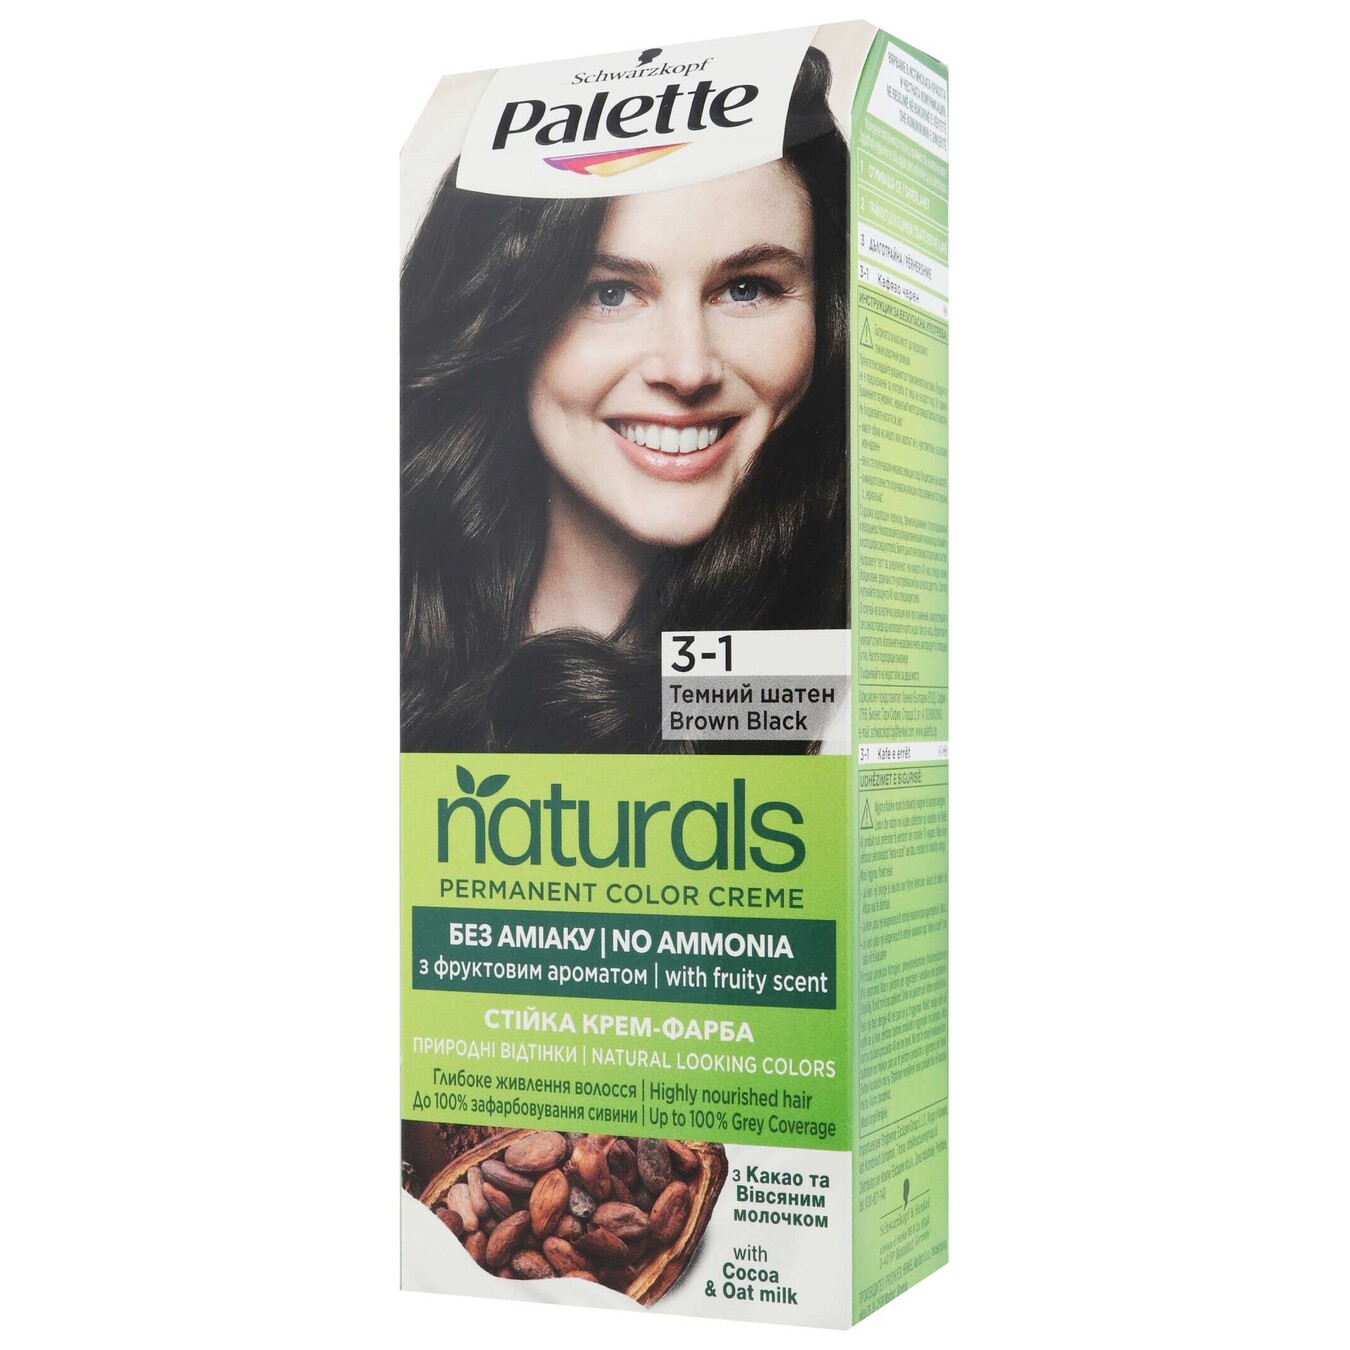 Cream-paint Palette Naturals 3-1 Dark brown without ammonia permanent for hair 110ml 2